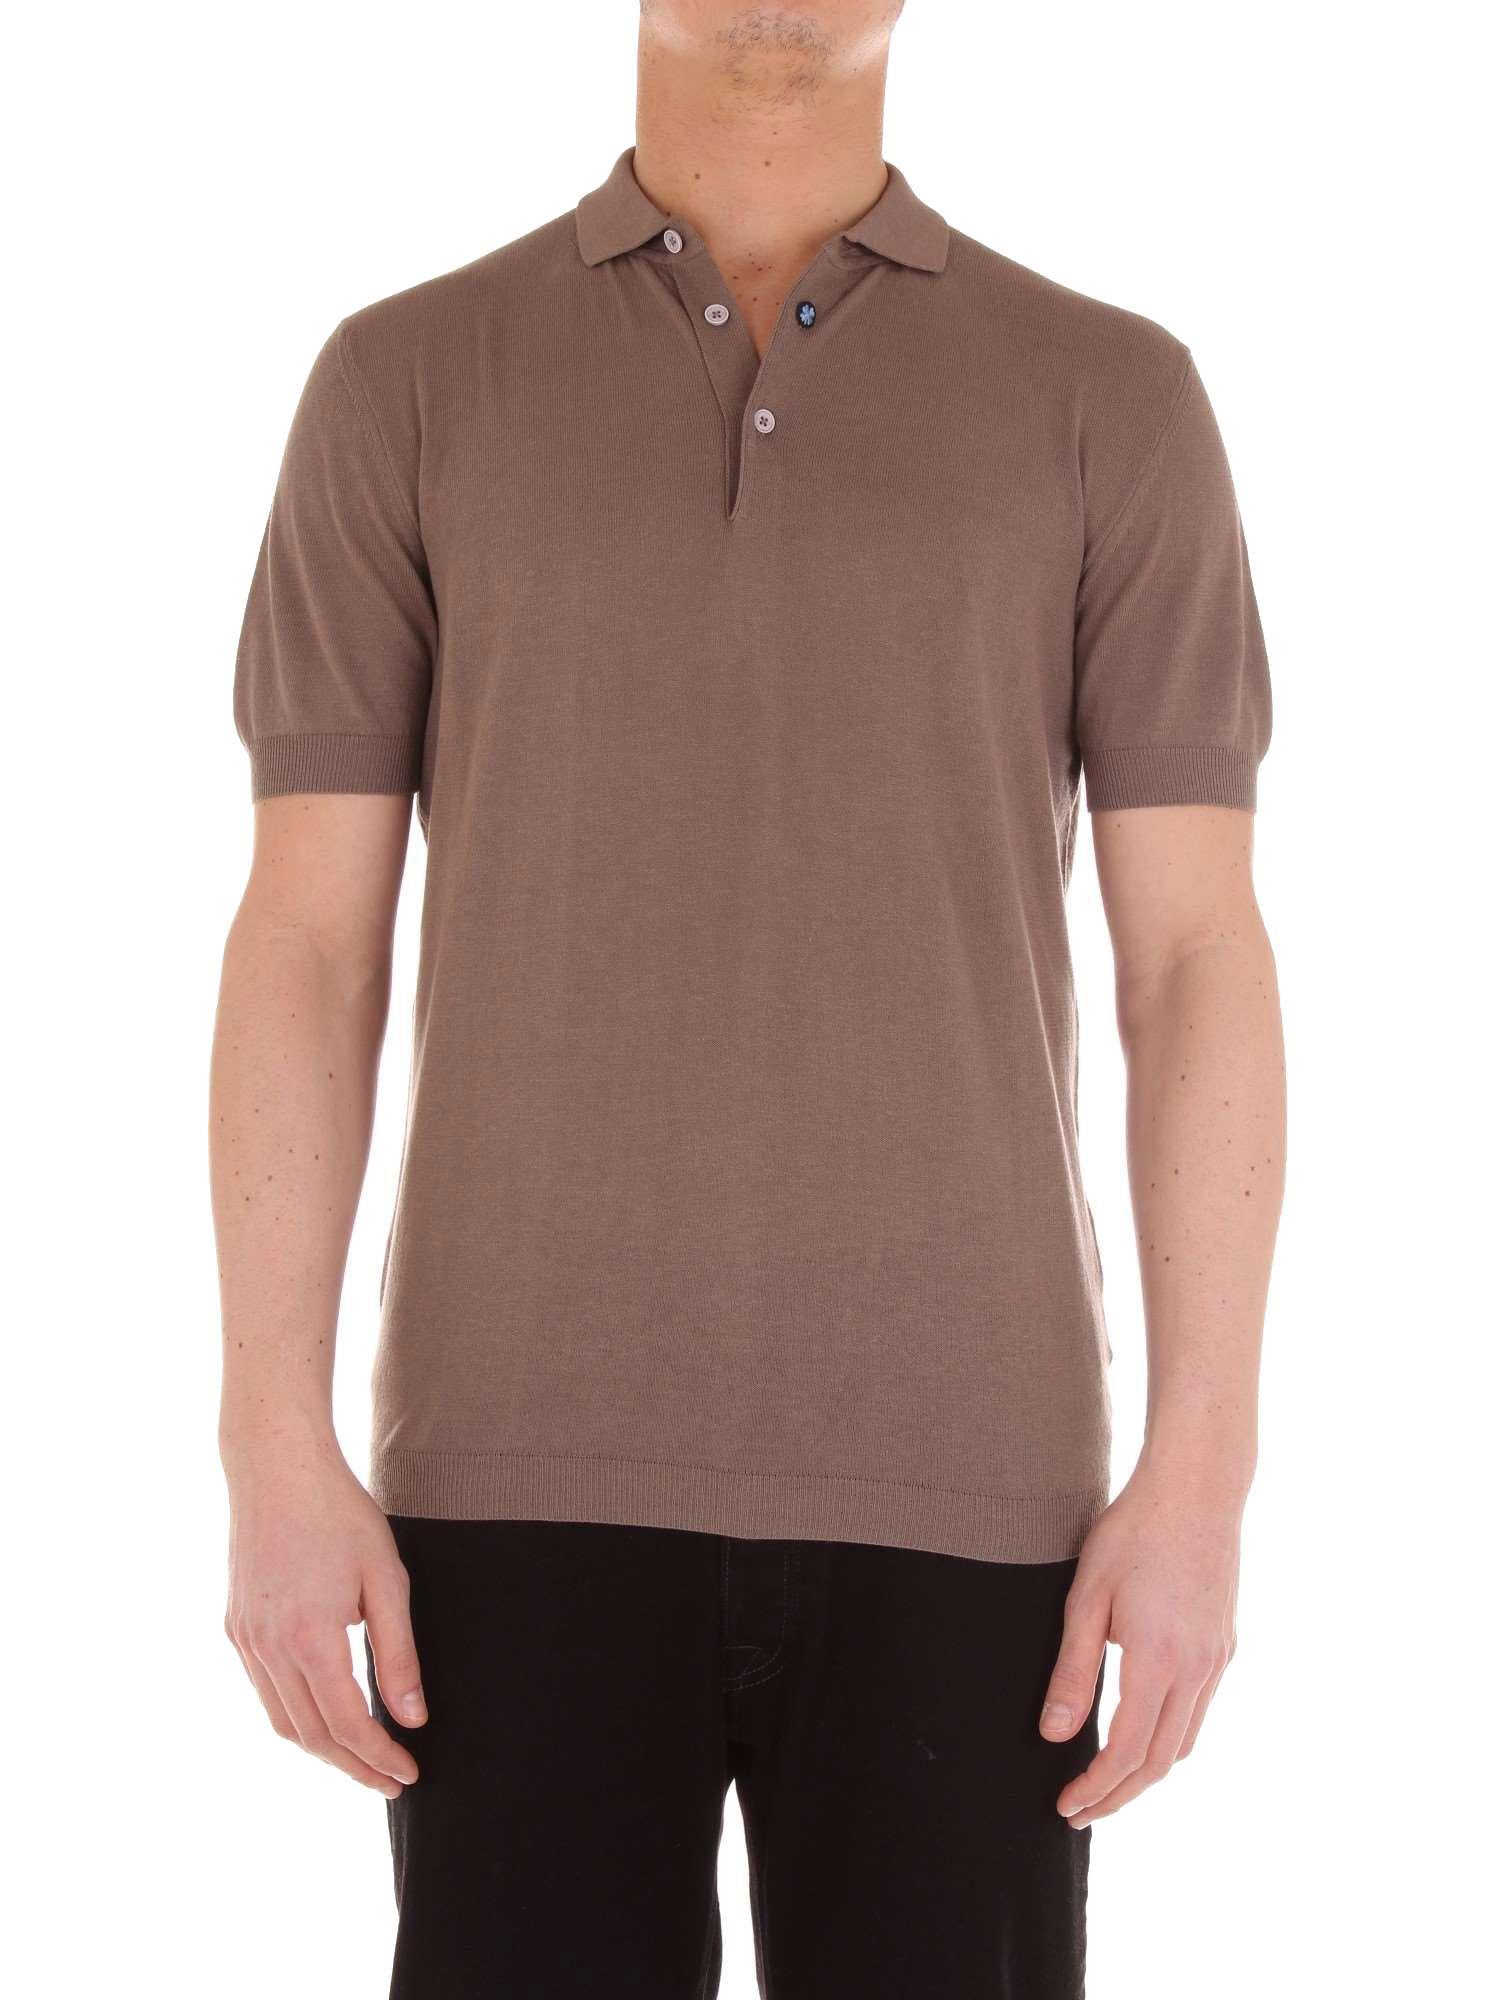 Heritage Brown Cotton Polo Shirt in Brown for Men - Lyst